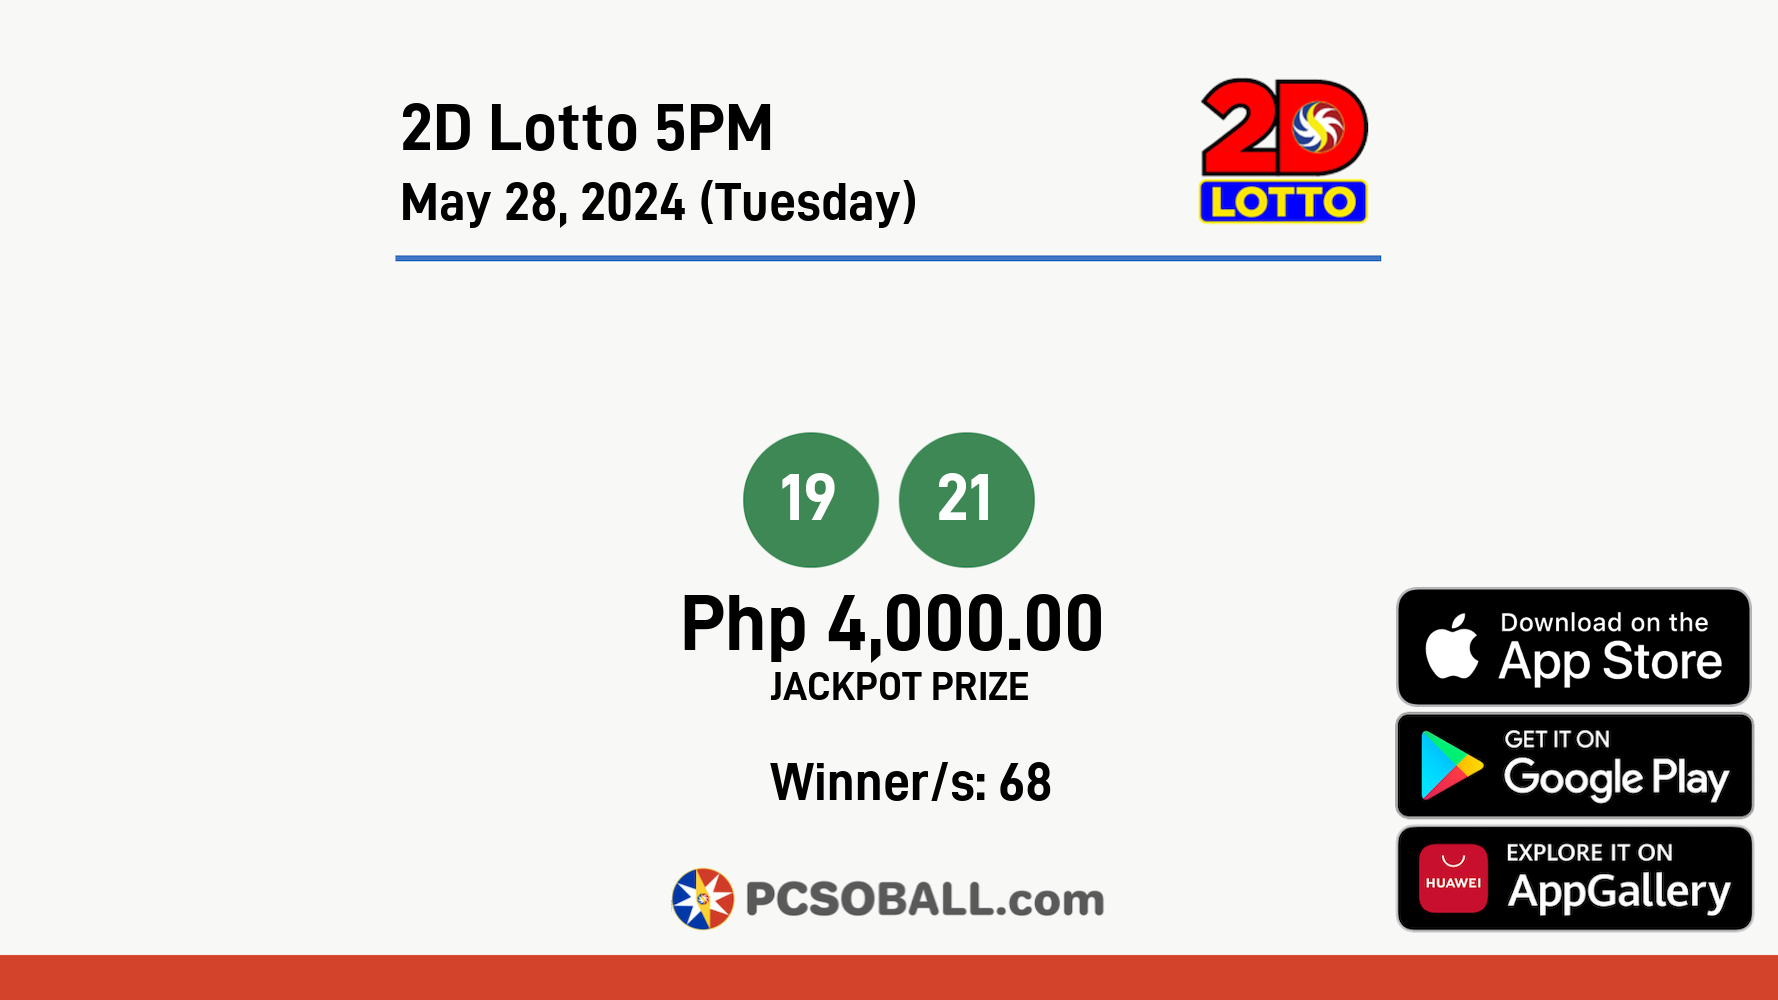 2D Lotto 5PM May 28, 2024 (Tuesday) Result